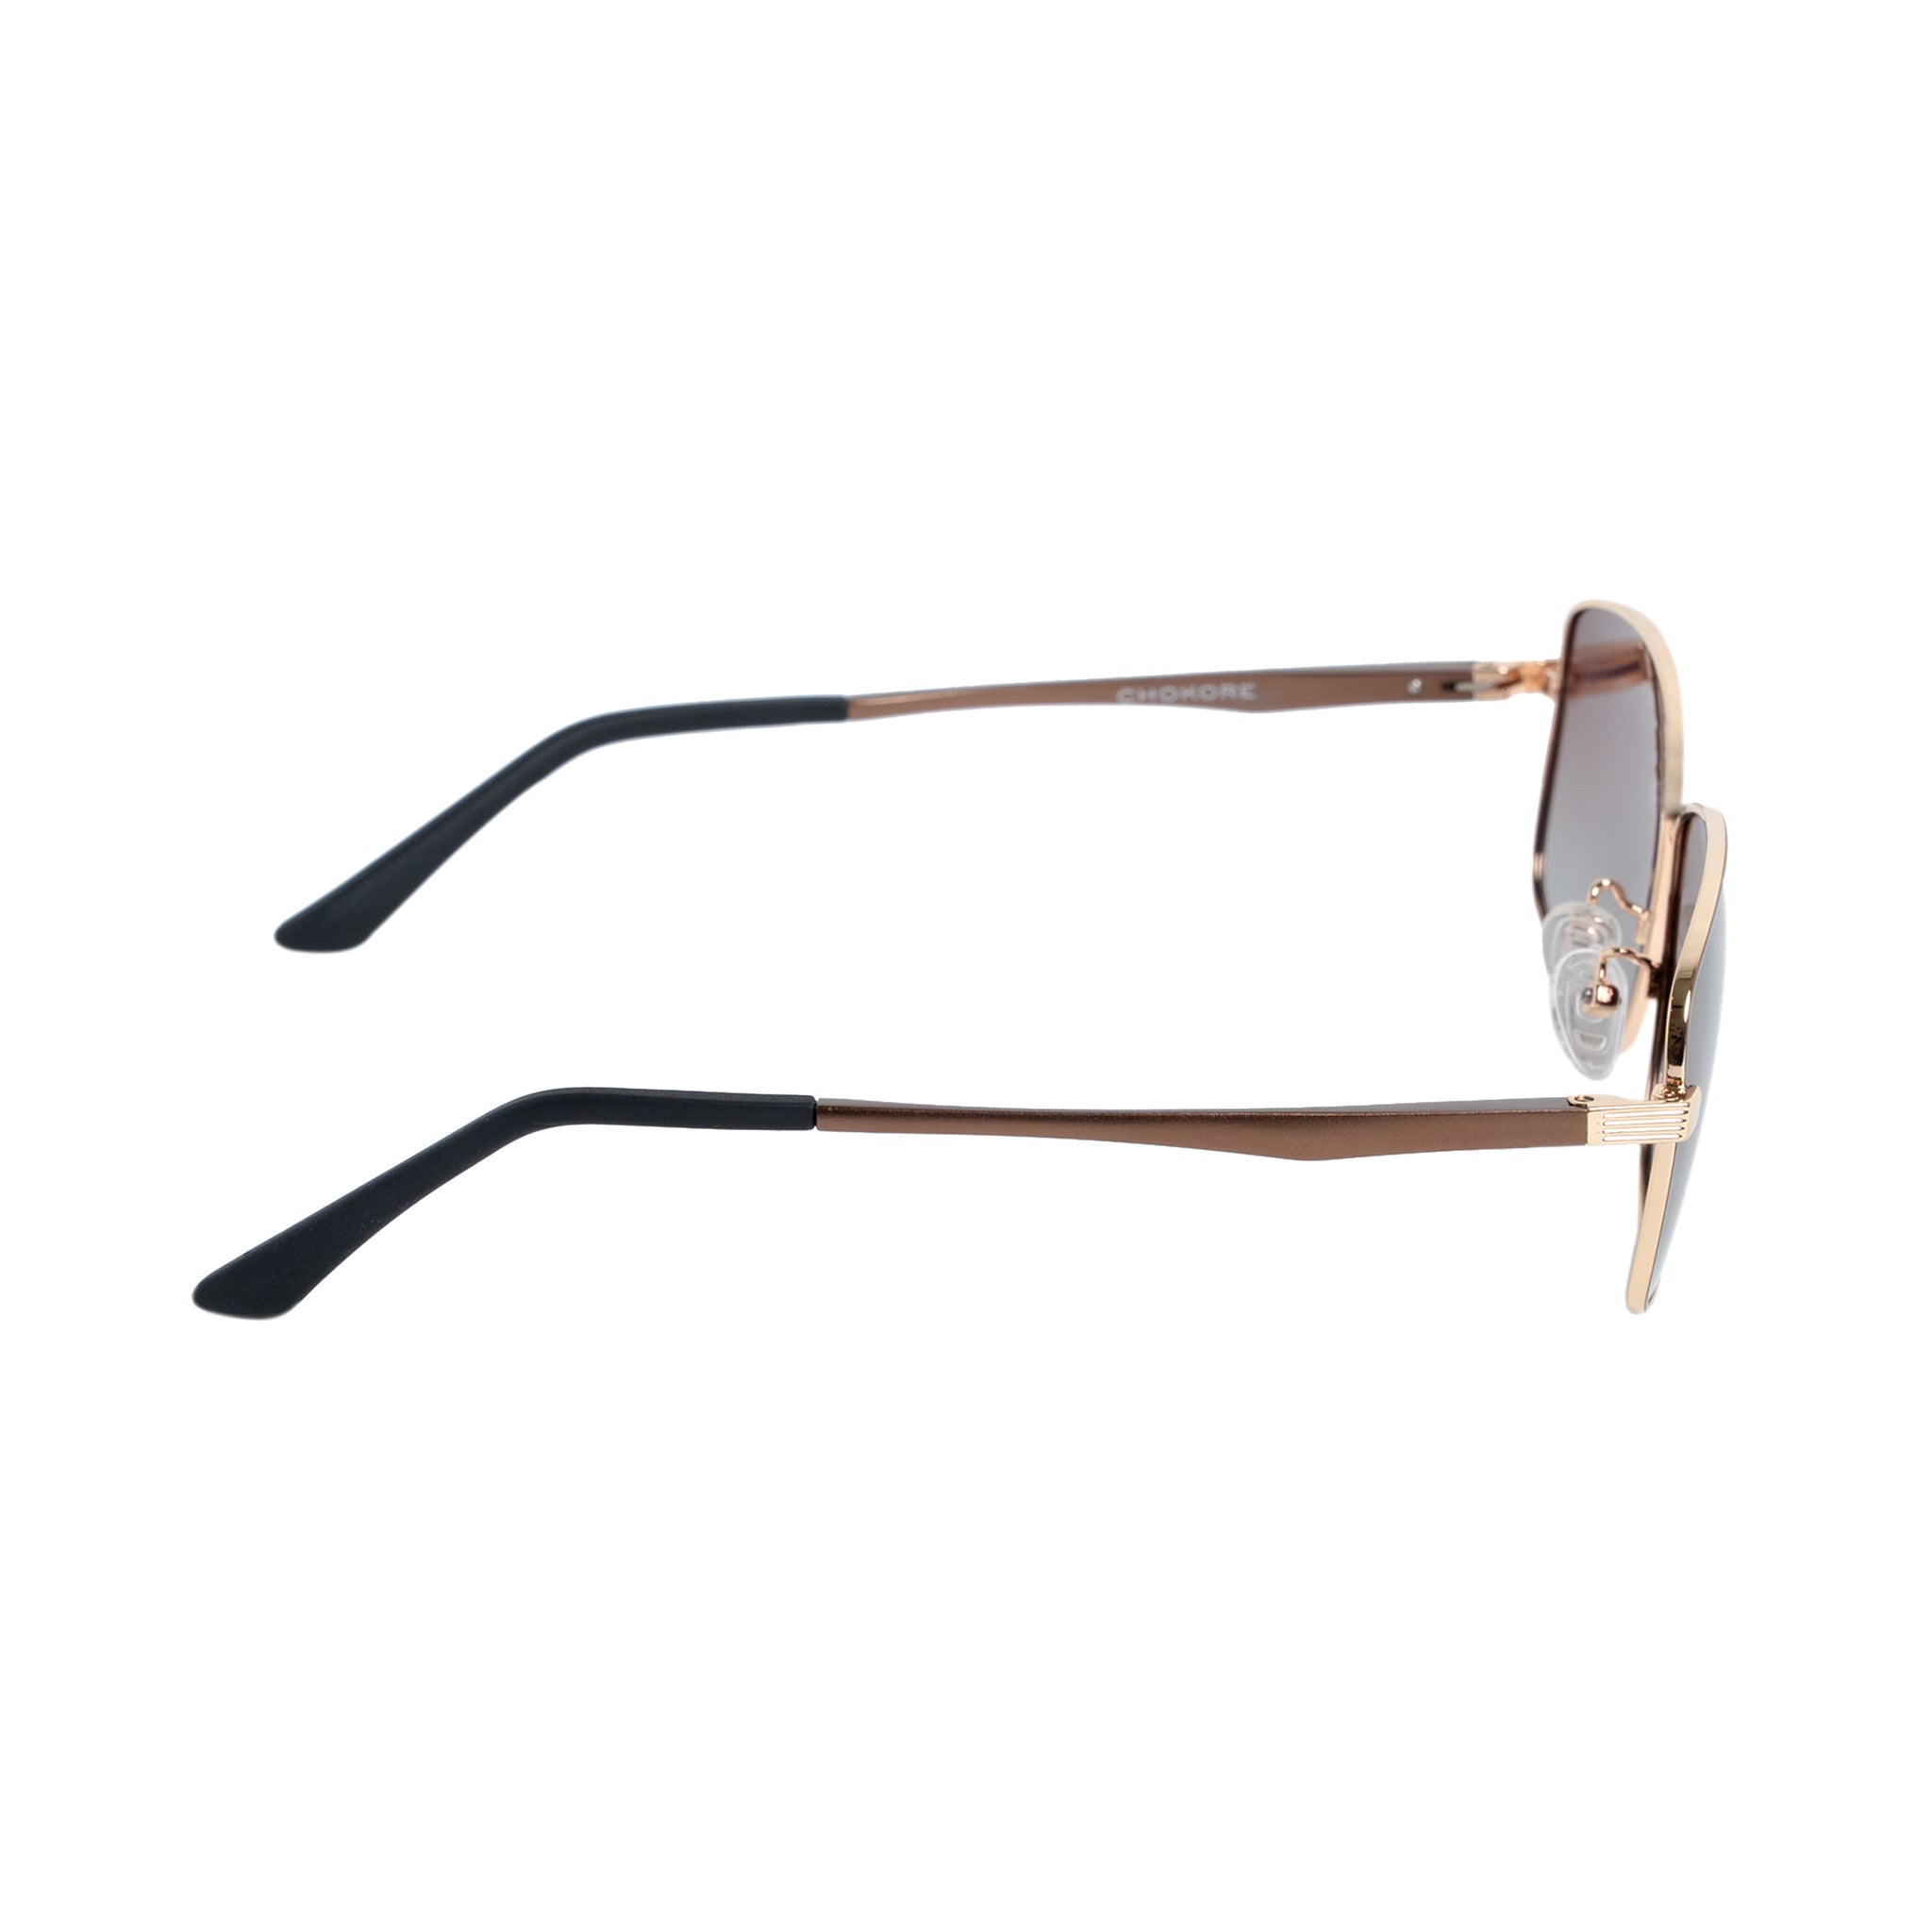 Chokore Rectangular Tinted Sunglasses with UV Protection (Brown & Gold)